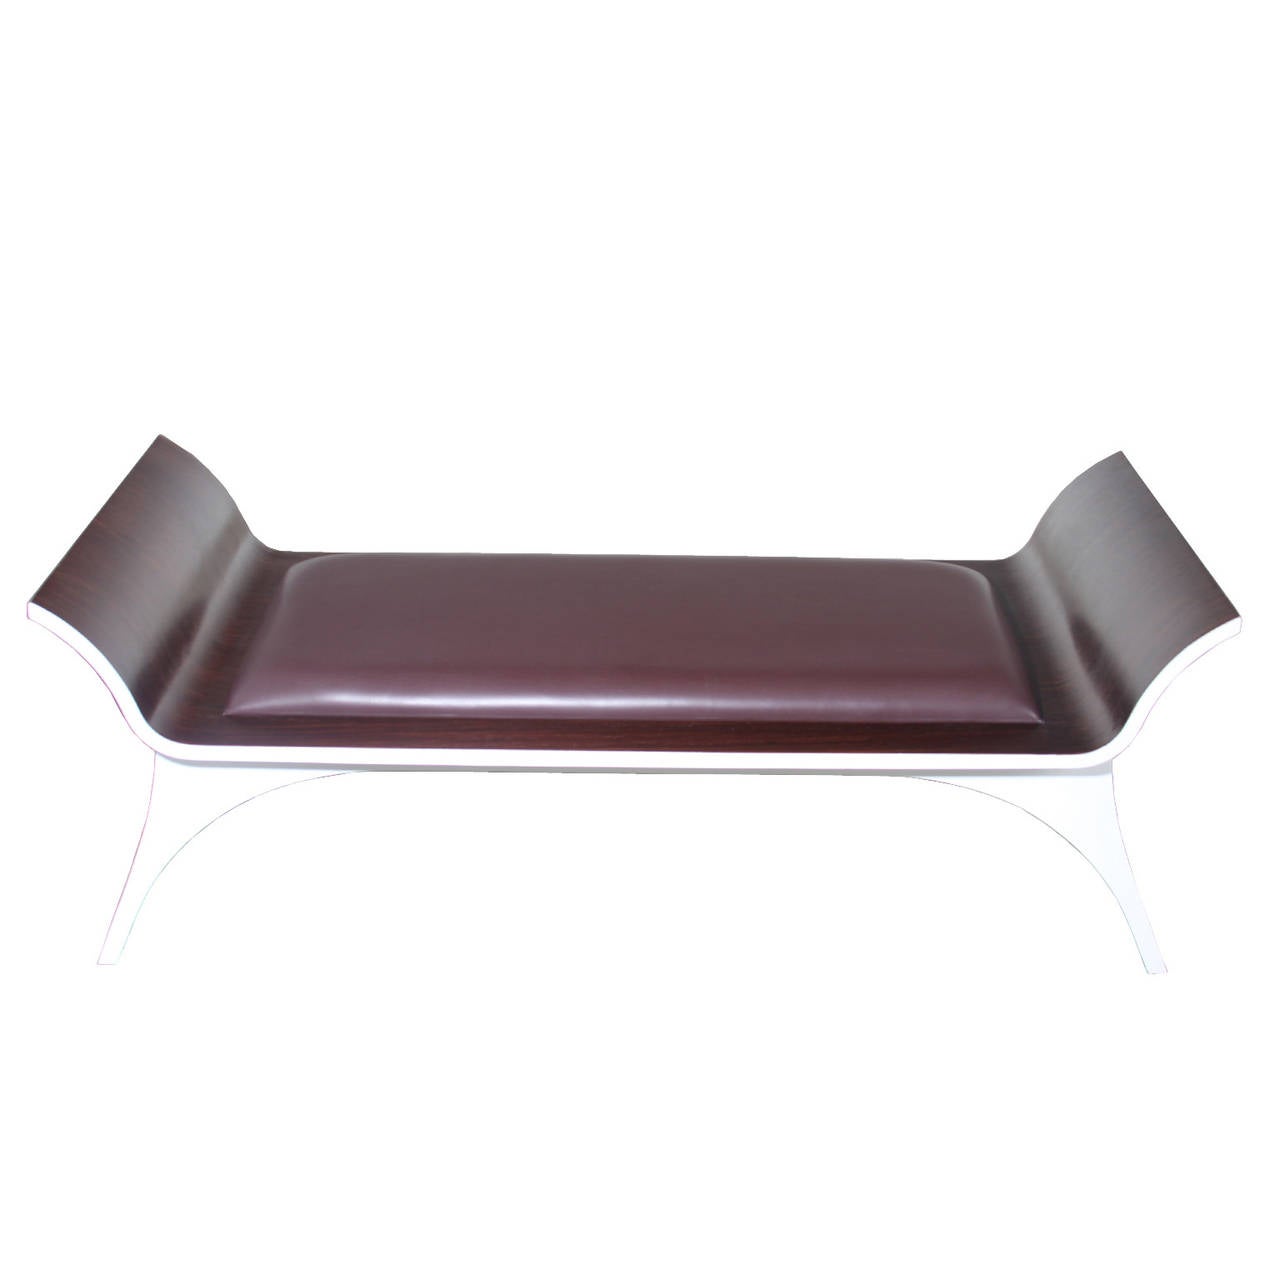 An elegant rosewood bench from Brazil. The seat is upholstered in a burgundy leather complimenting the red tones of the rosewood. The underside of the bench has been painted white adding contrast to the sculptural design with curvaceous